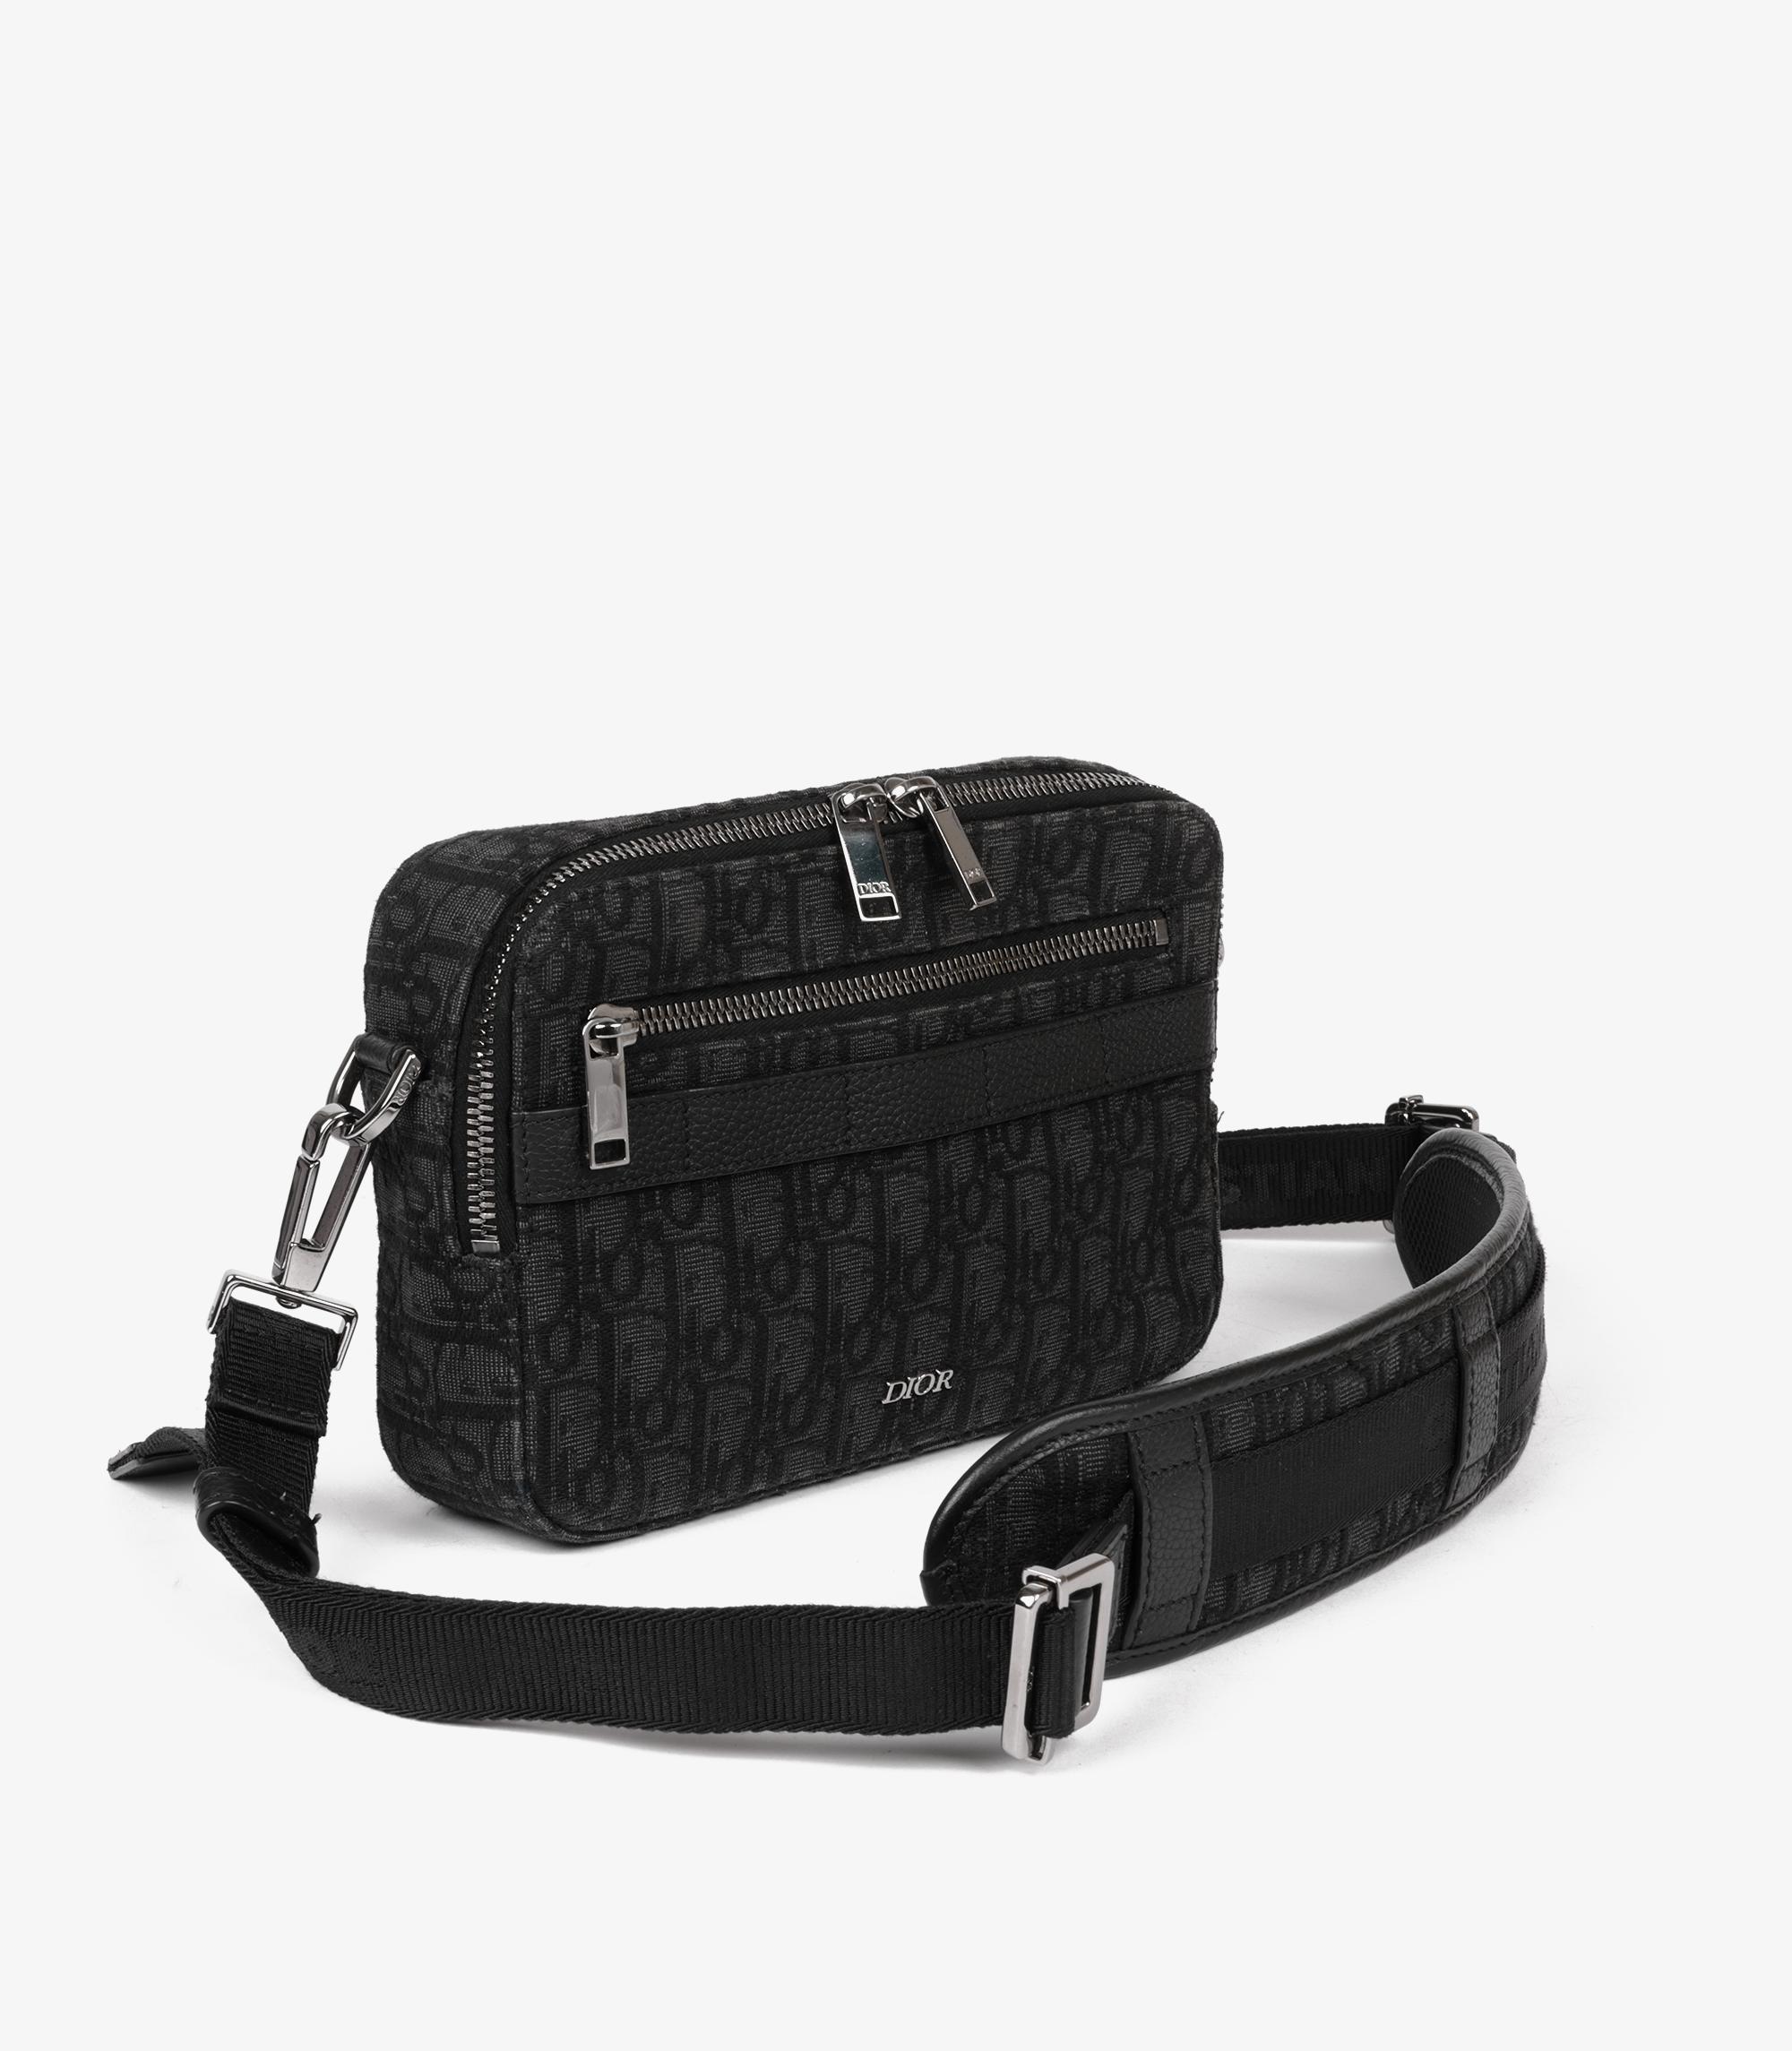 Christian Dior Black Oblique Jacquard & Grained Calfskin Leather Safari Bag With Strap

Brand- Christian Dior
Model- Safari Bag with Strap
Product Type- Crossbody, Shoulder
Serial Number- 21********
Age- Circa 2021
Accompanied By- Christian Dior